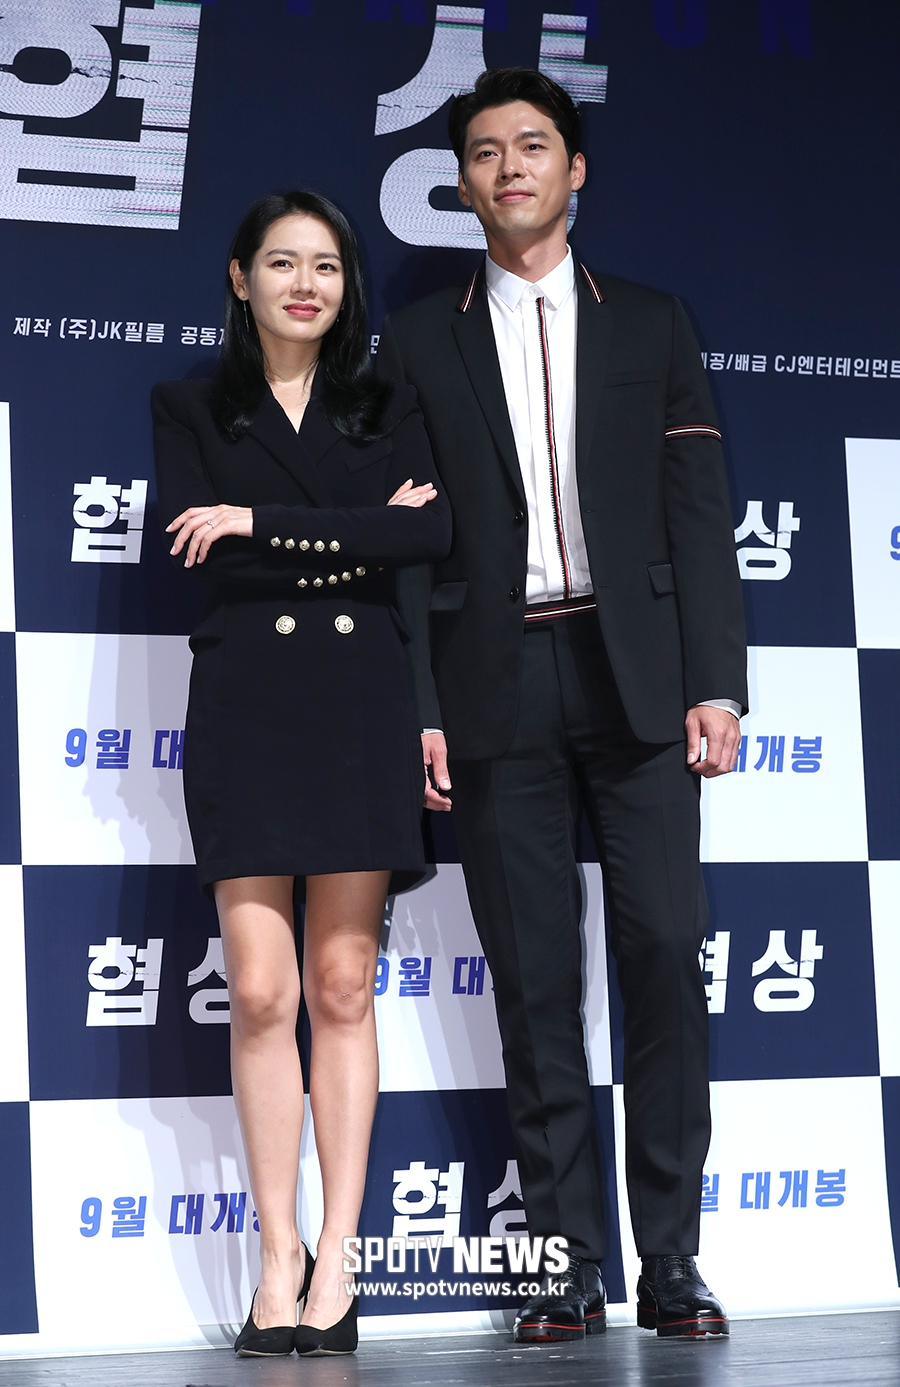 Both sides denied the second romance rumor by actor Hyun Bin, 37, and Son Ye-jin, 37.Hyun Bin and Son Ye-jin were caught up in two romance rumours in more than a decade; the first was the last 10 days.Rumors of a companion trip erupted as the pair were seen together at the United States of America, which led to a romance rumor.At the time, Hyun Bin and Son Ye-jins agency drew the line, saying, I did not travel together.Hyun Bin had a schedule, and Son Ye-jin was an explanation of a personal trip.The romance rumor, which seems to end with Happening, was resurfaced on the 21st.This time, a photo was released showing Hyun Bin and Son Ye-jin looking at the chapter at Mart together.The two accompanied a Mart, and added strength to the accompaniment travel story to the view of the chapter.But this time, too, is ending in Snow. The first person to make a position was Hyun Bin.The agency said, I know that the two of them are in contact with each other because they are in United States of America.I think the two people are concentrated because they are Celeb, and other acquaintances have also seen the chapter together. It is misleading, but it is not a couple relationship, it is Friend. The position of Son Ye-jins agency, which was revealed following, was not different.An agency official said, Mr. Son Ye-jin traveled to United States of America to meet his acquaintance.I met Mr. Hyun Bin after learning that he was in United States of America, and I was in touch; its a close relationship, but its not a couple, he said.Meanwhile, Hyun Bin and Son Ye-jin made their first breath in the movie Negotiations released last September.